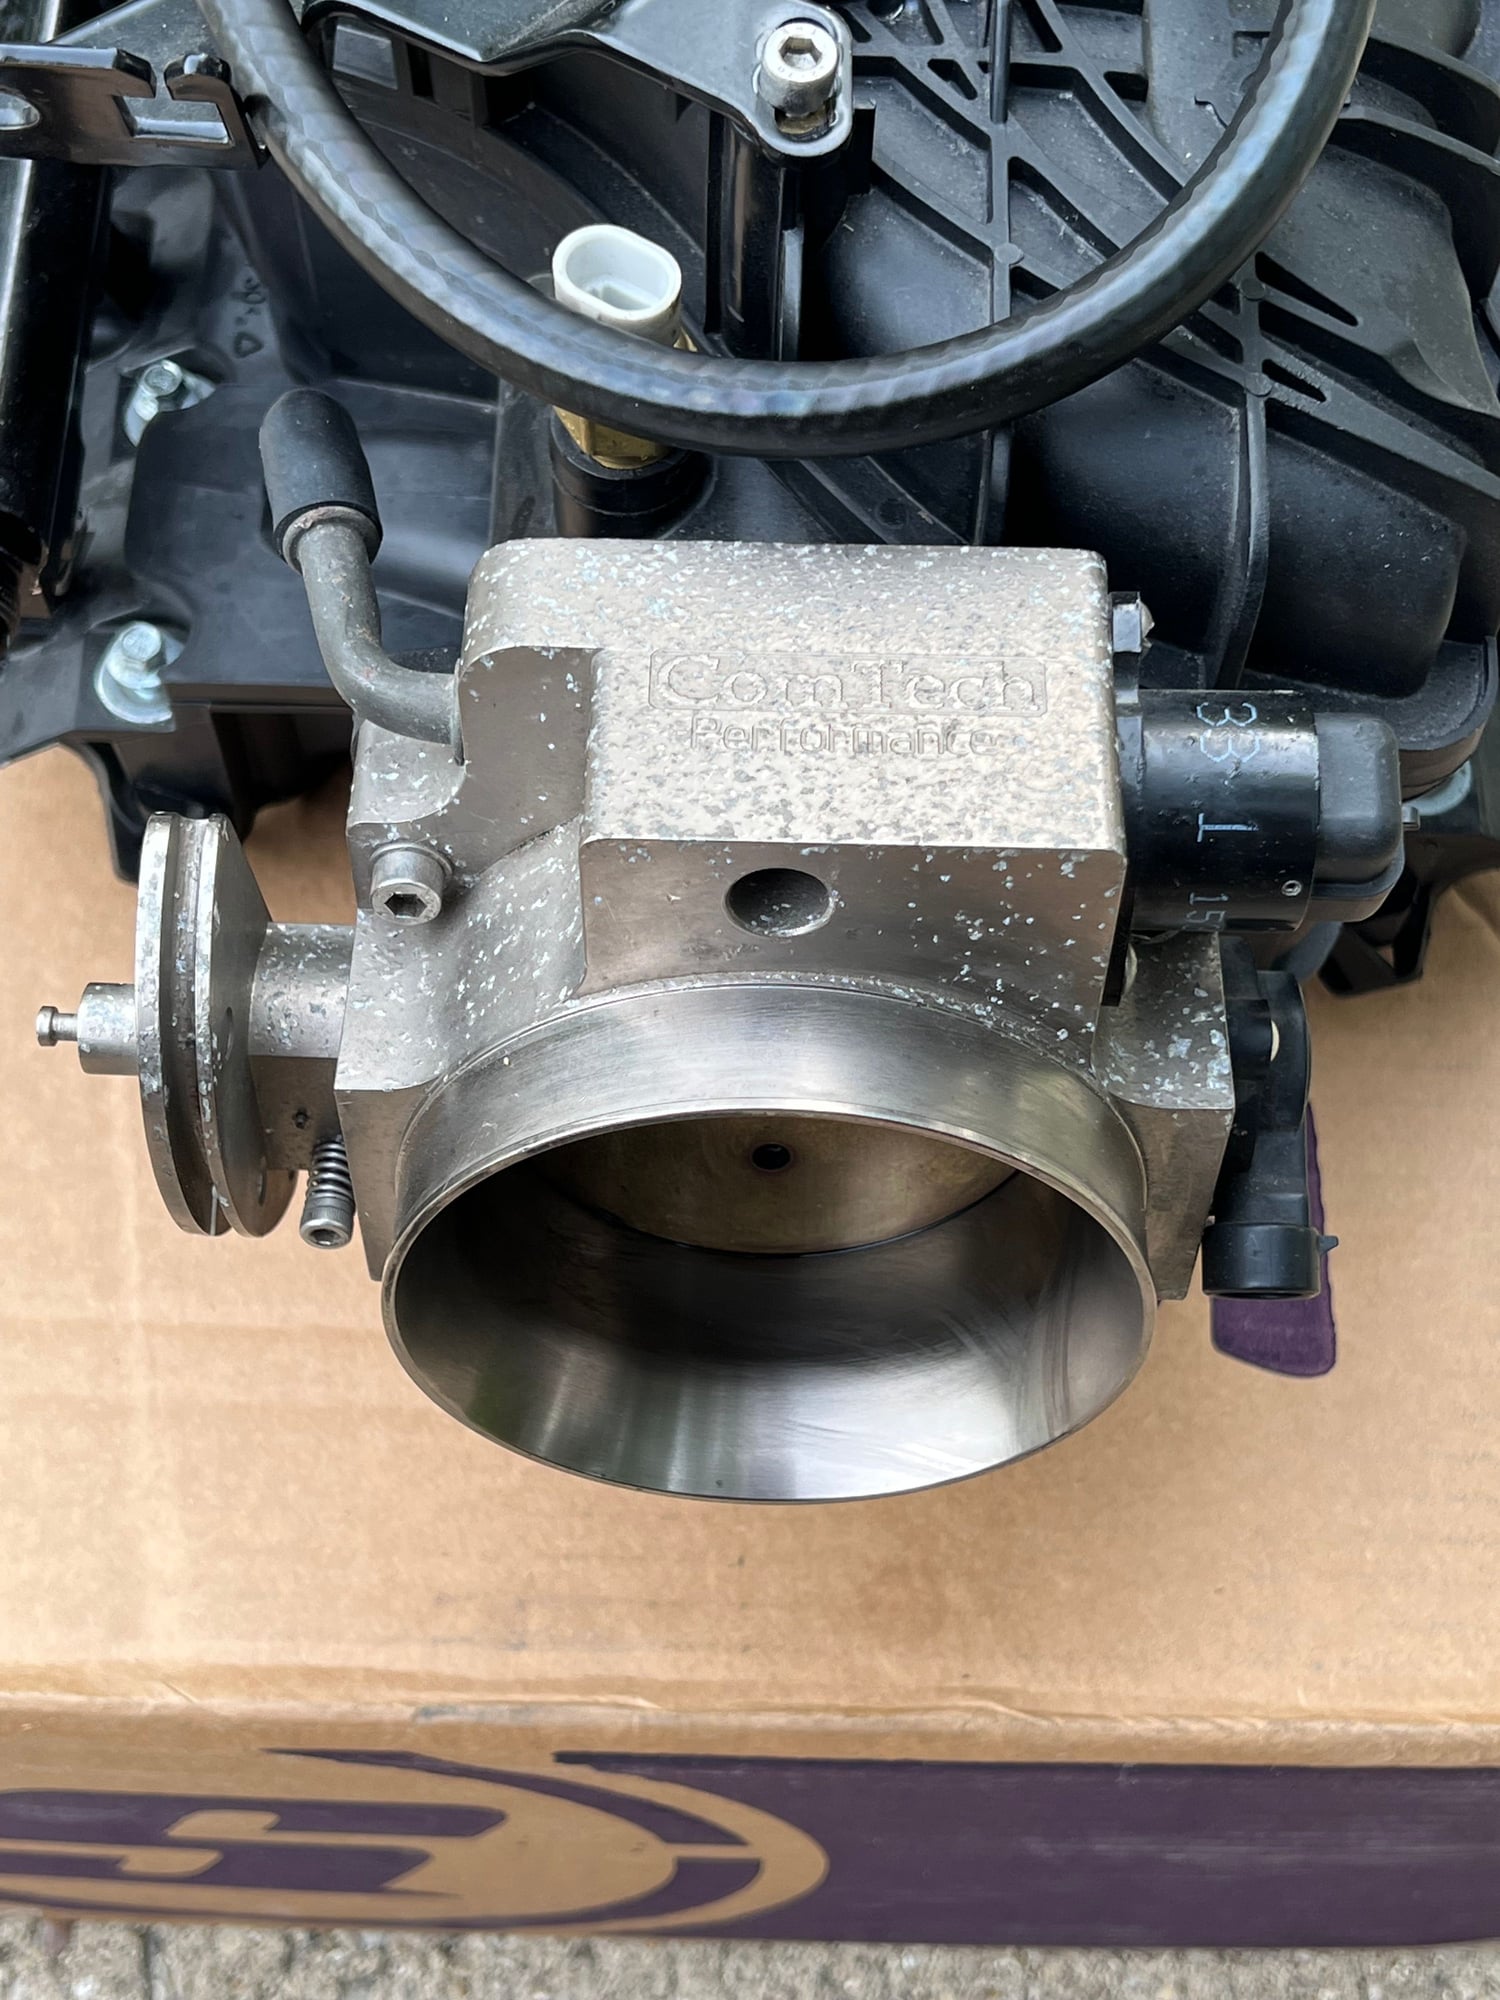 Engine - Intake/Fuel - Square port truck intake - Used - All Years  All Models - Streator, IL 61364, United States